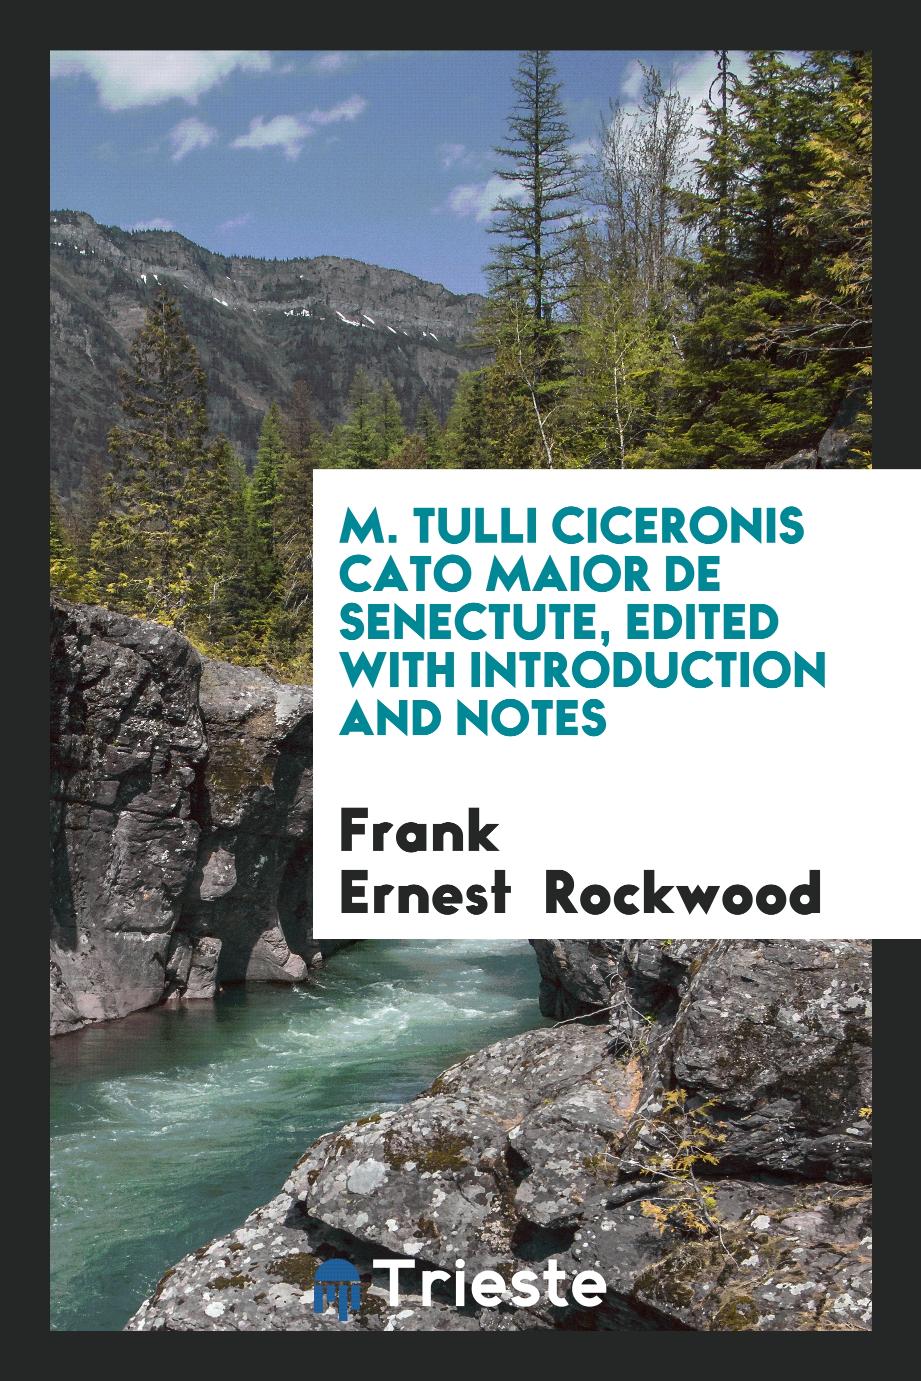 M. Tulli Ciceronis Cato Maior De Senectute, Edited with Introduction and Notes